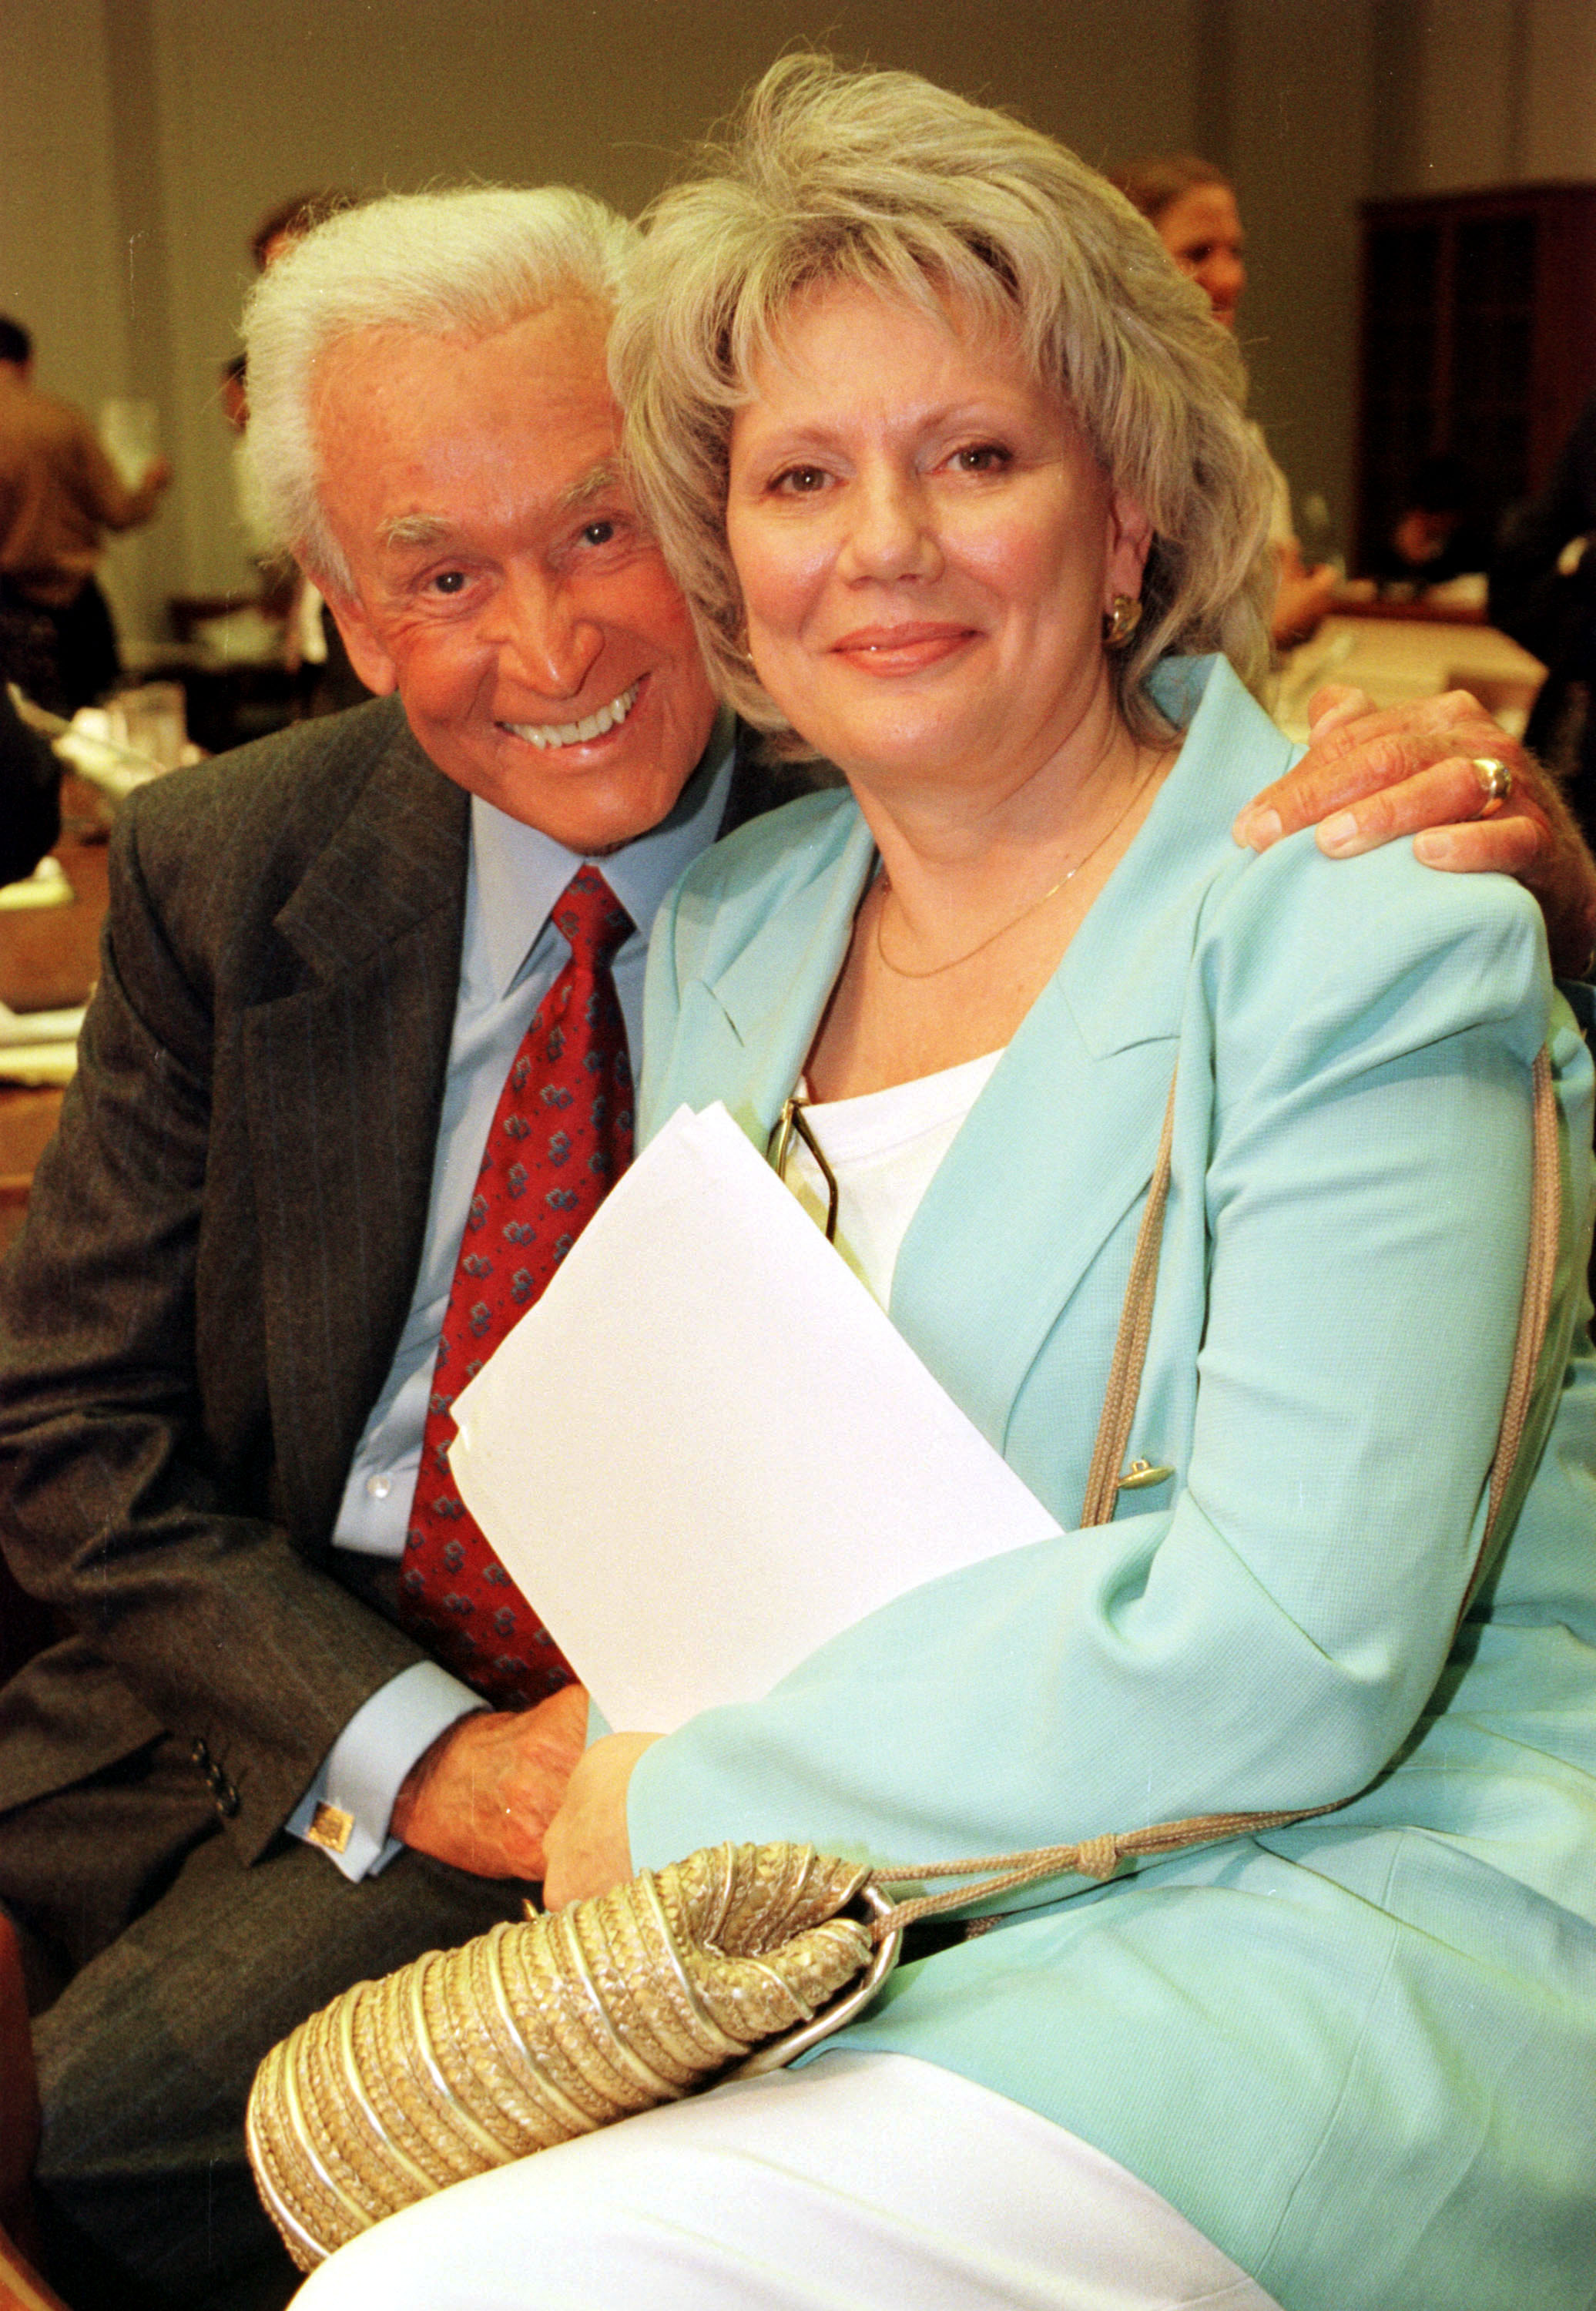 Bob Barker and Nancy Burnet after a hearing on the "Captive Elephant Accident Prevention Act of 1999" in Washington, 2000 | Source: Getty Images